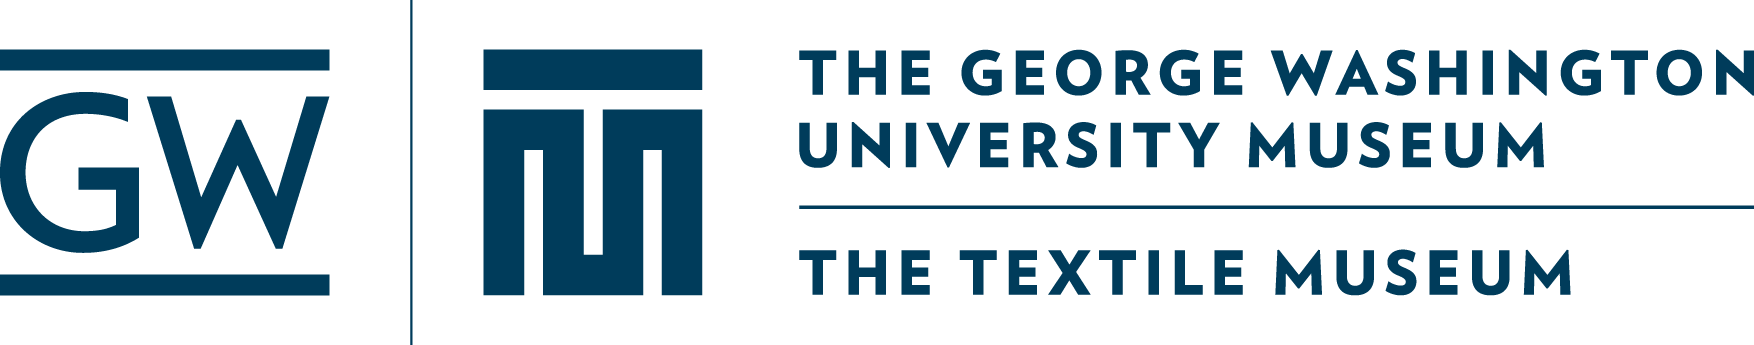 The George Washington University Museum and The Textile Museum site logo